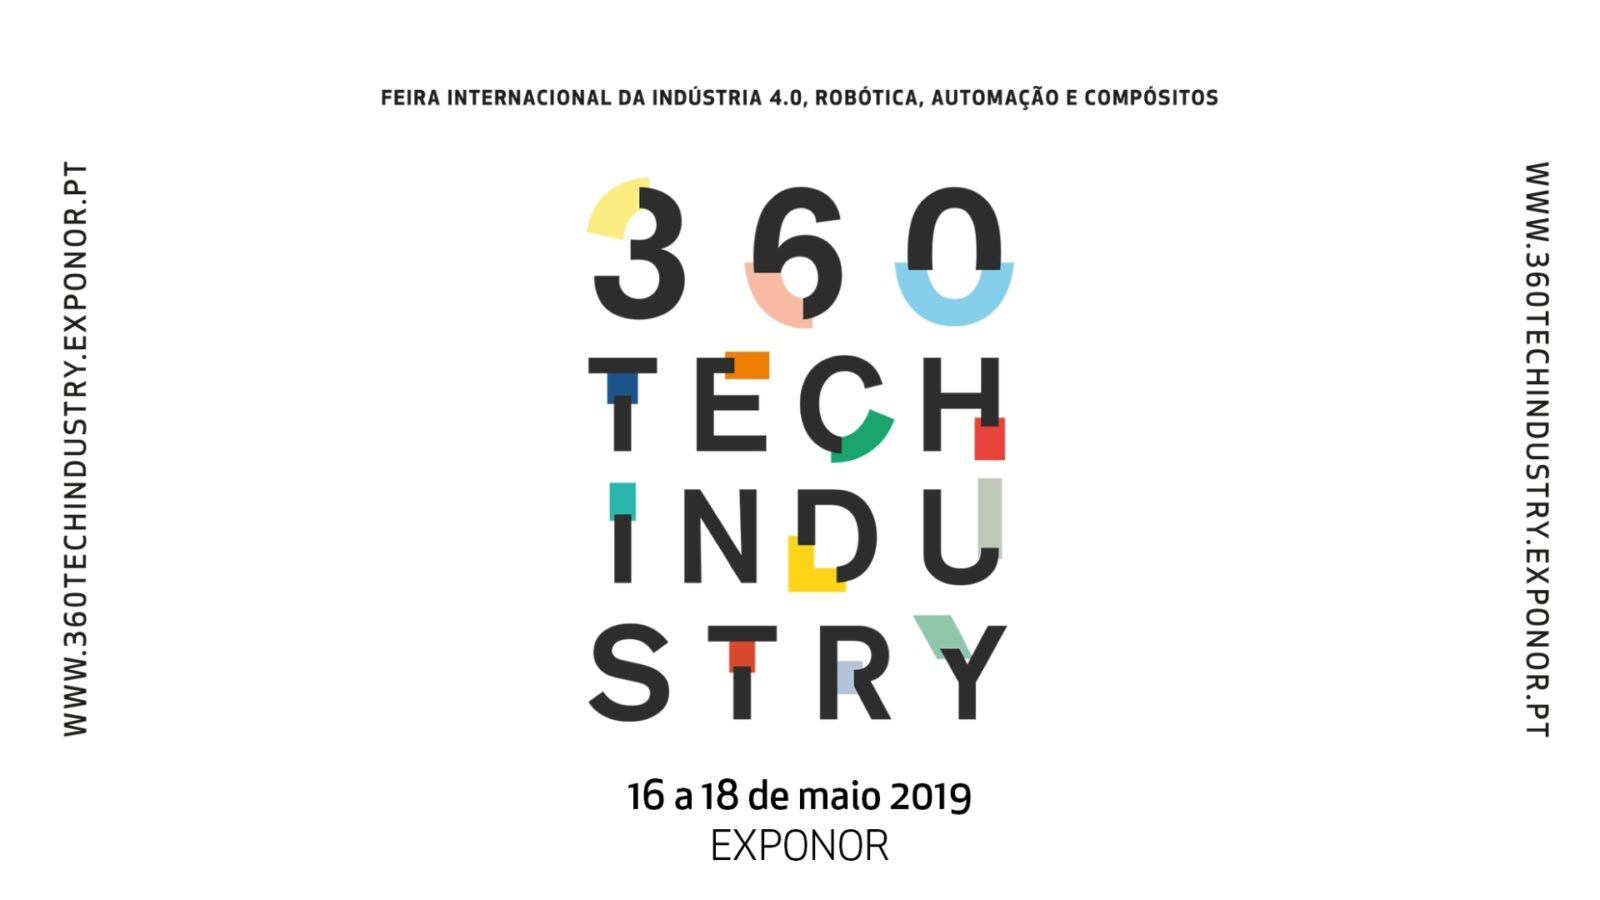 Exponor Exhibitions 360 Tech Industry